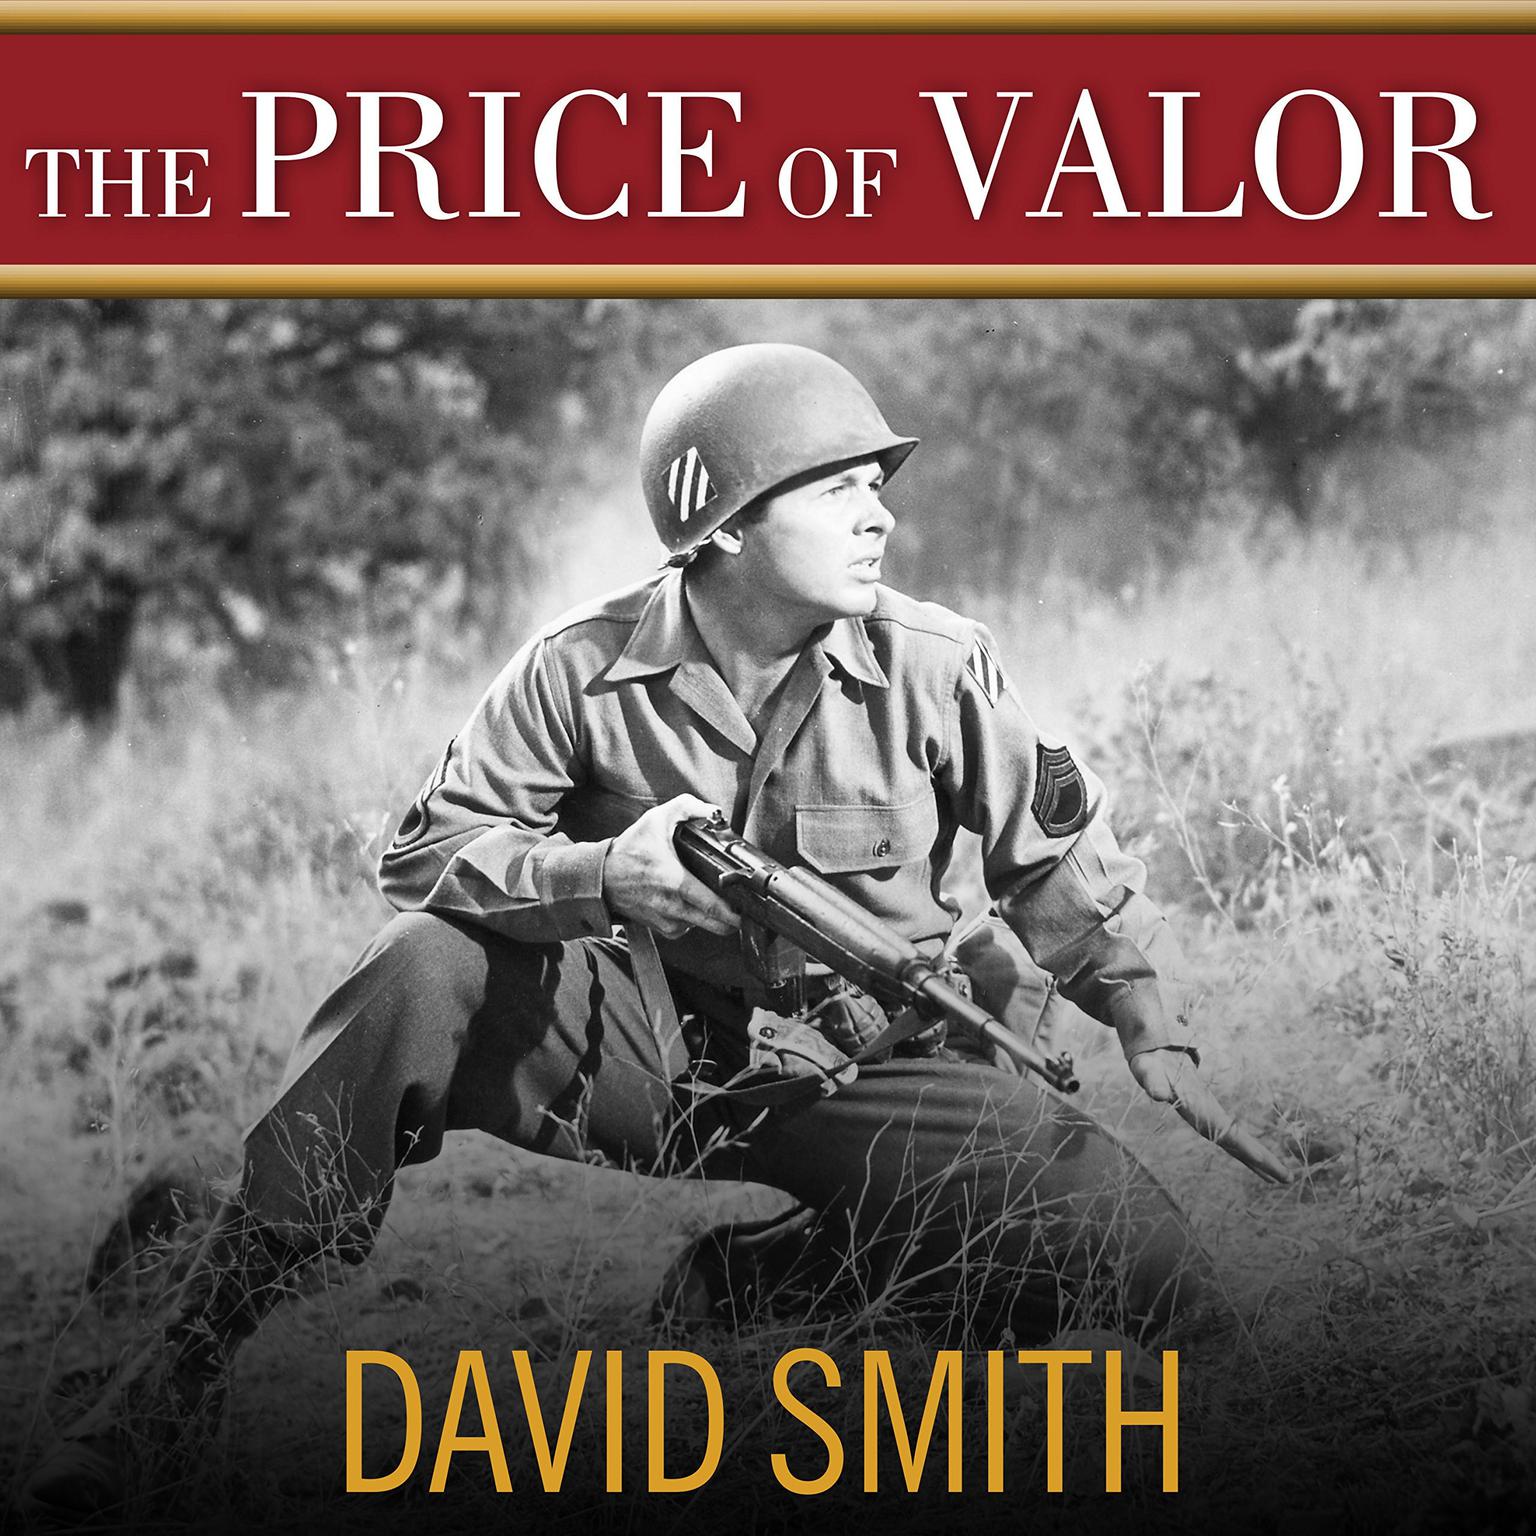 The Price of Valor: The Life of Audie Murphy, Americas Most Decorated Hero of World War II Audiobook, by David Smith